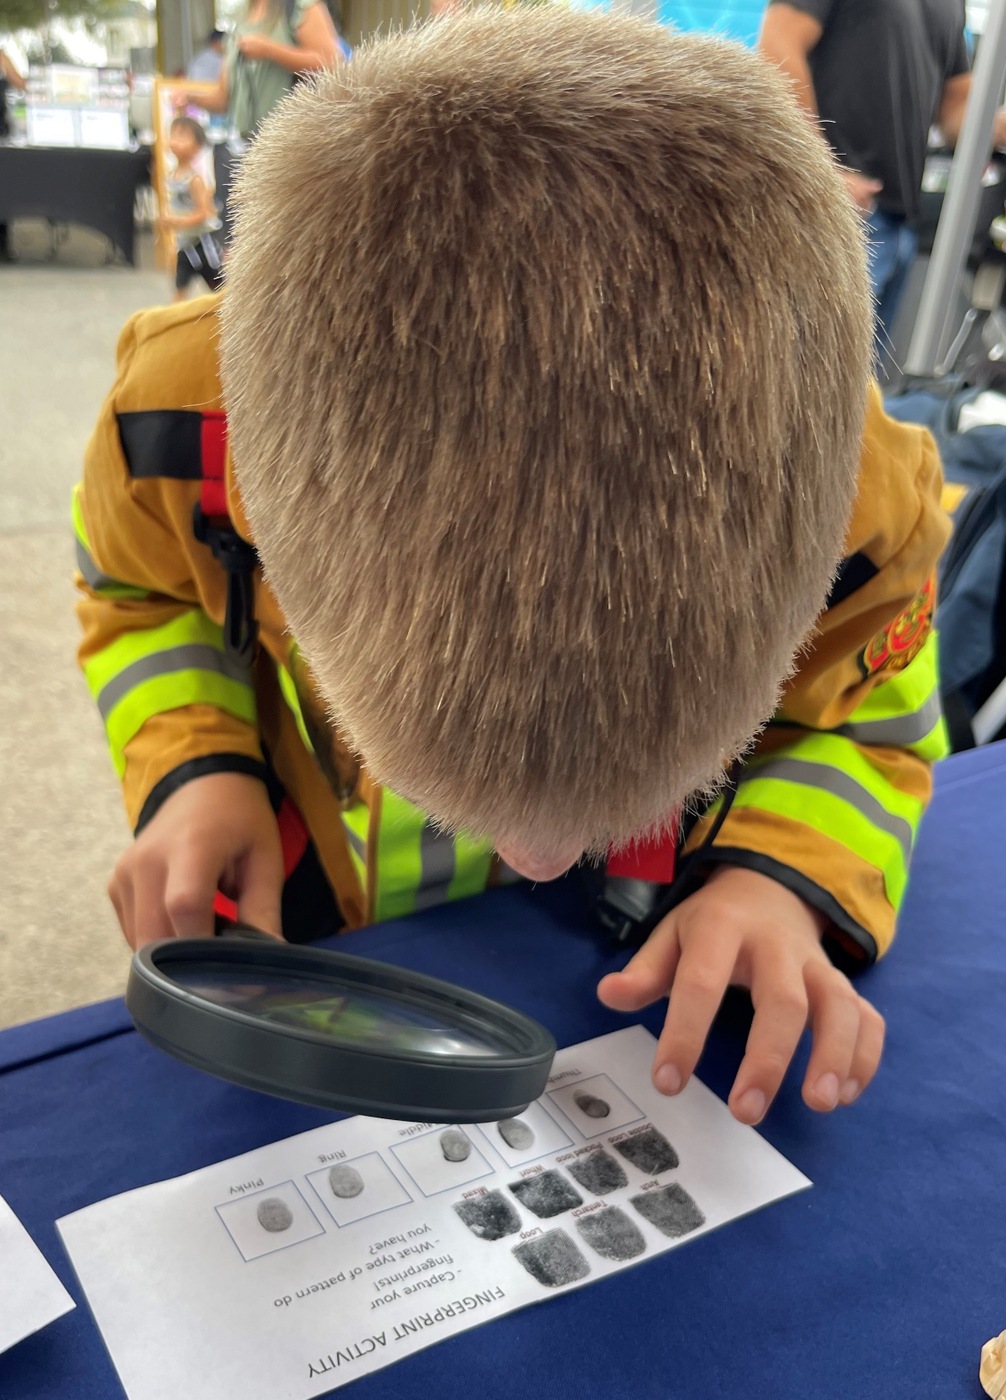 Child at the San Diego Family Safety Day event studies fingerprints.